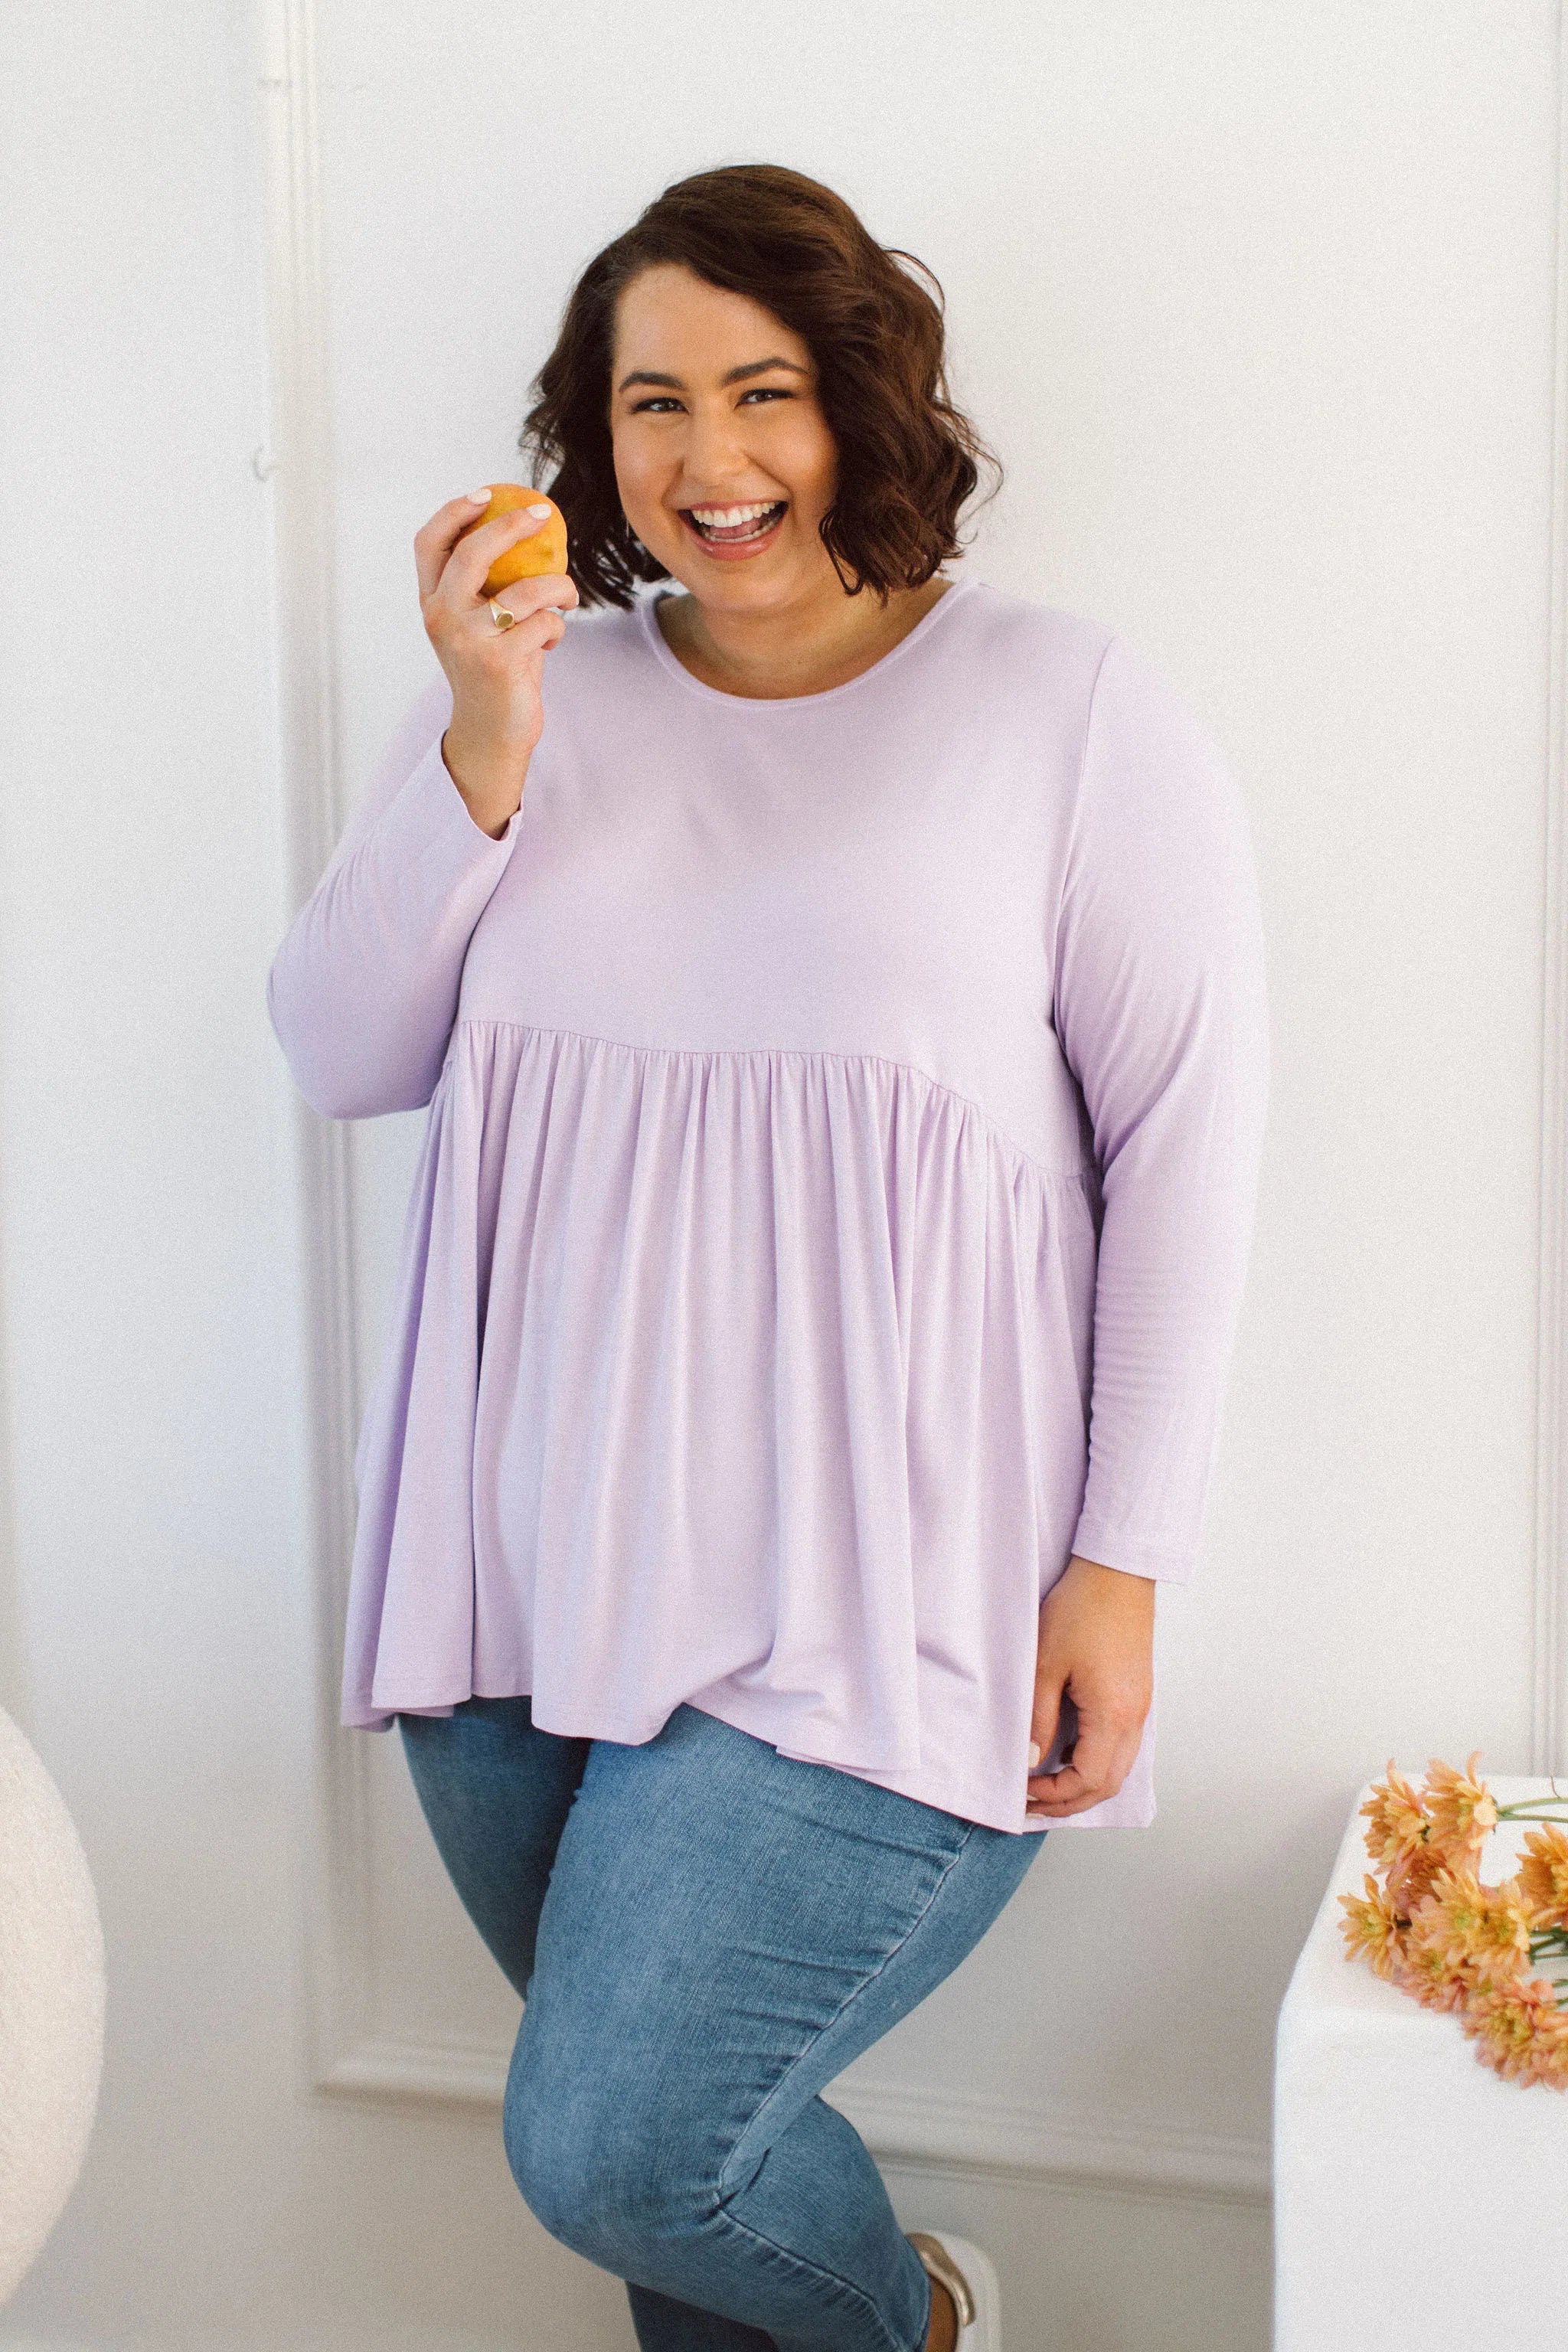 Plus Size clothing,  women modeling a Plus size womens shirt, Lucy Long Sleeve Top in Purple Lilac